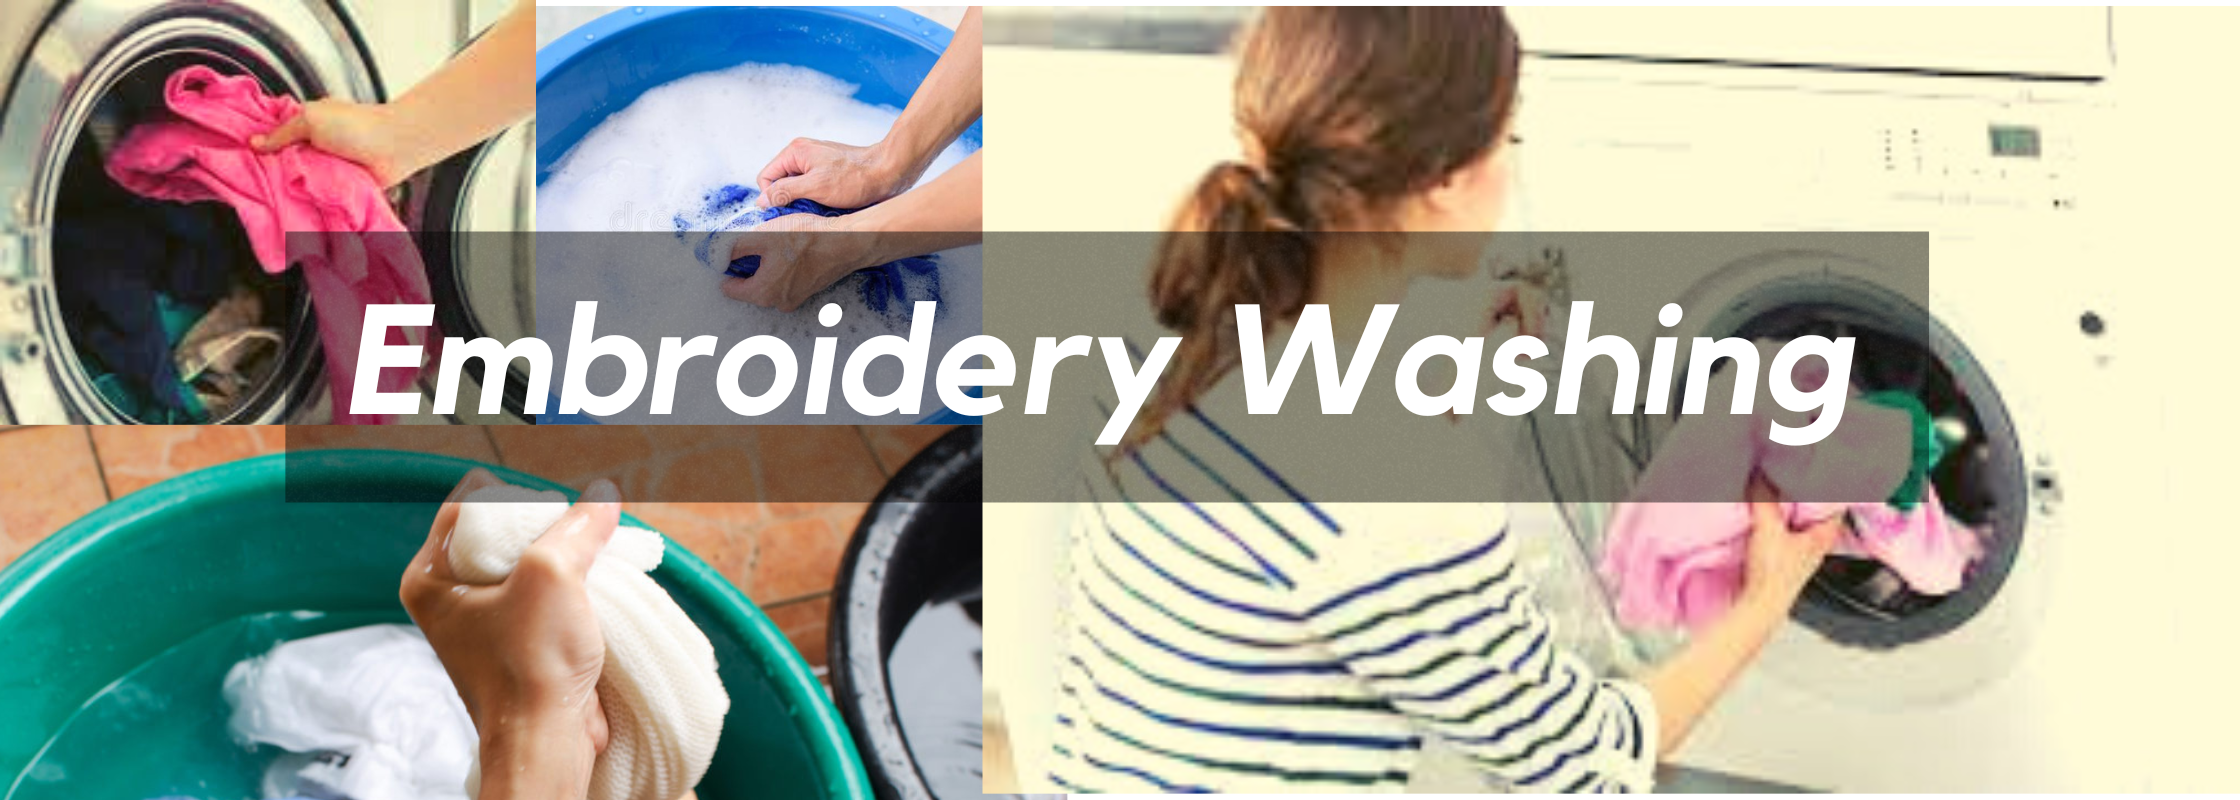 How to Wash Embroidery